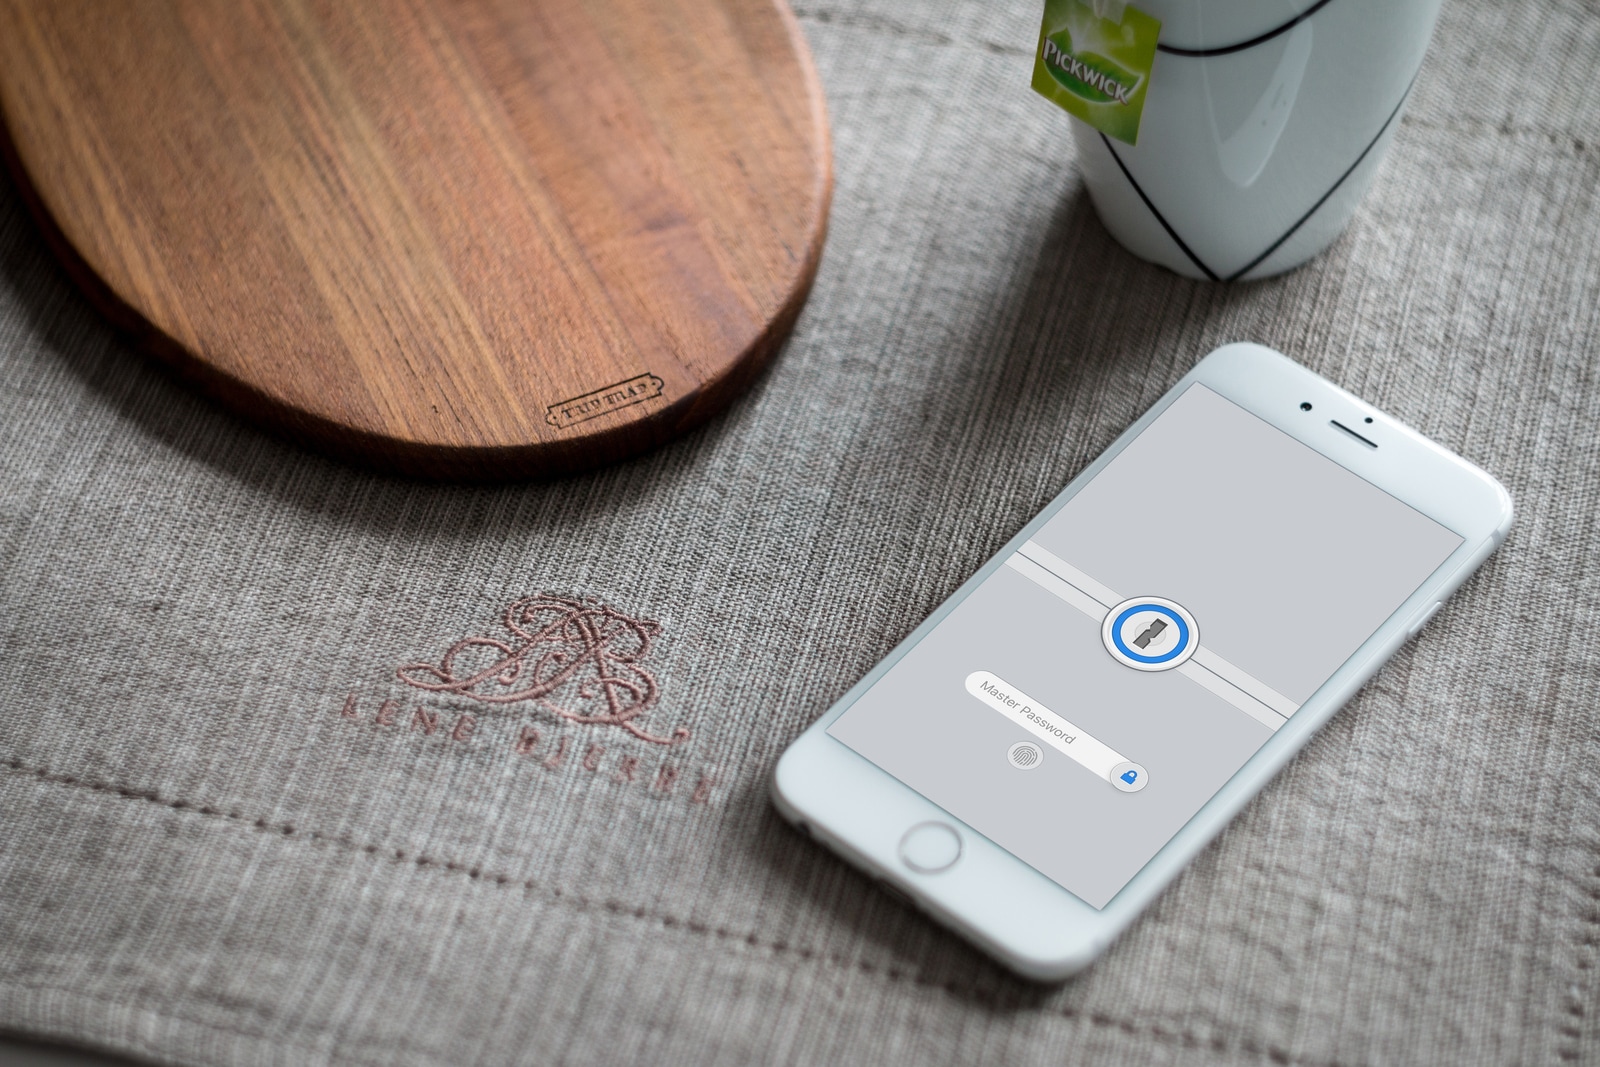 1Password brings back local vault support on iOS; Instagram, Overcast, and AirBuddy are updated